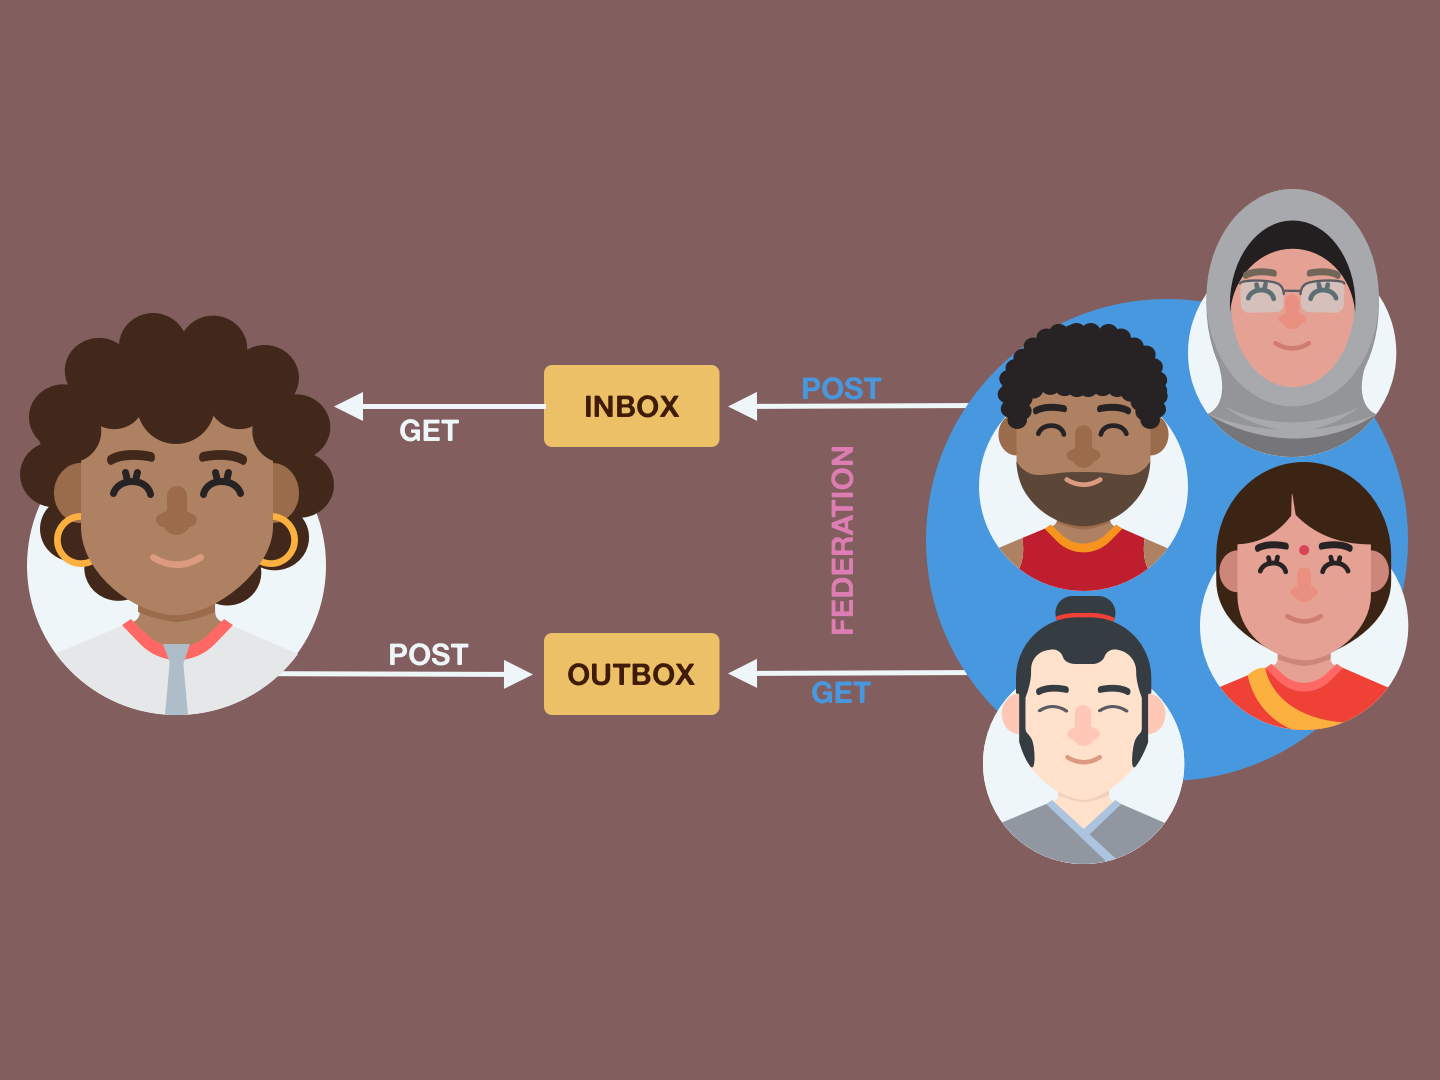 Image has two groups of people. On the left is a smiling Black woman and on the
right is a group of four smiling people - a Black man, an Indian woman, a woman wearing
a Hijab, and a Japanese man with his hair styled in a Samurai bun.